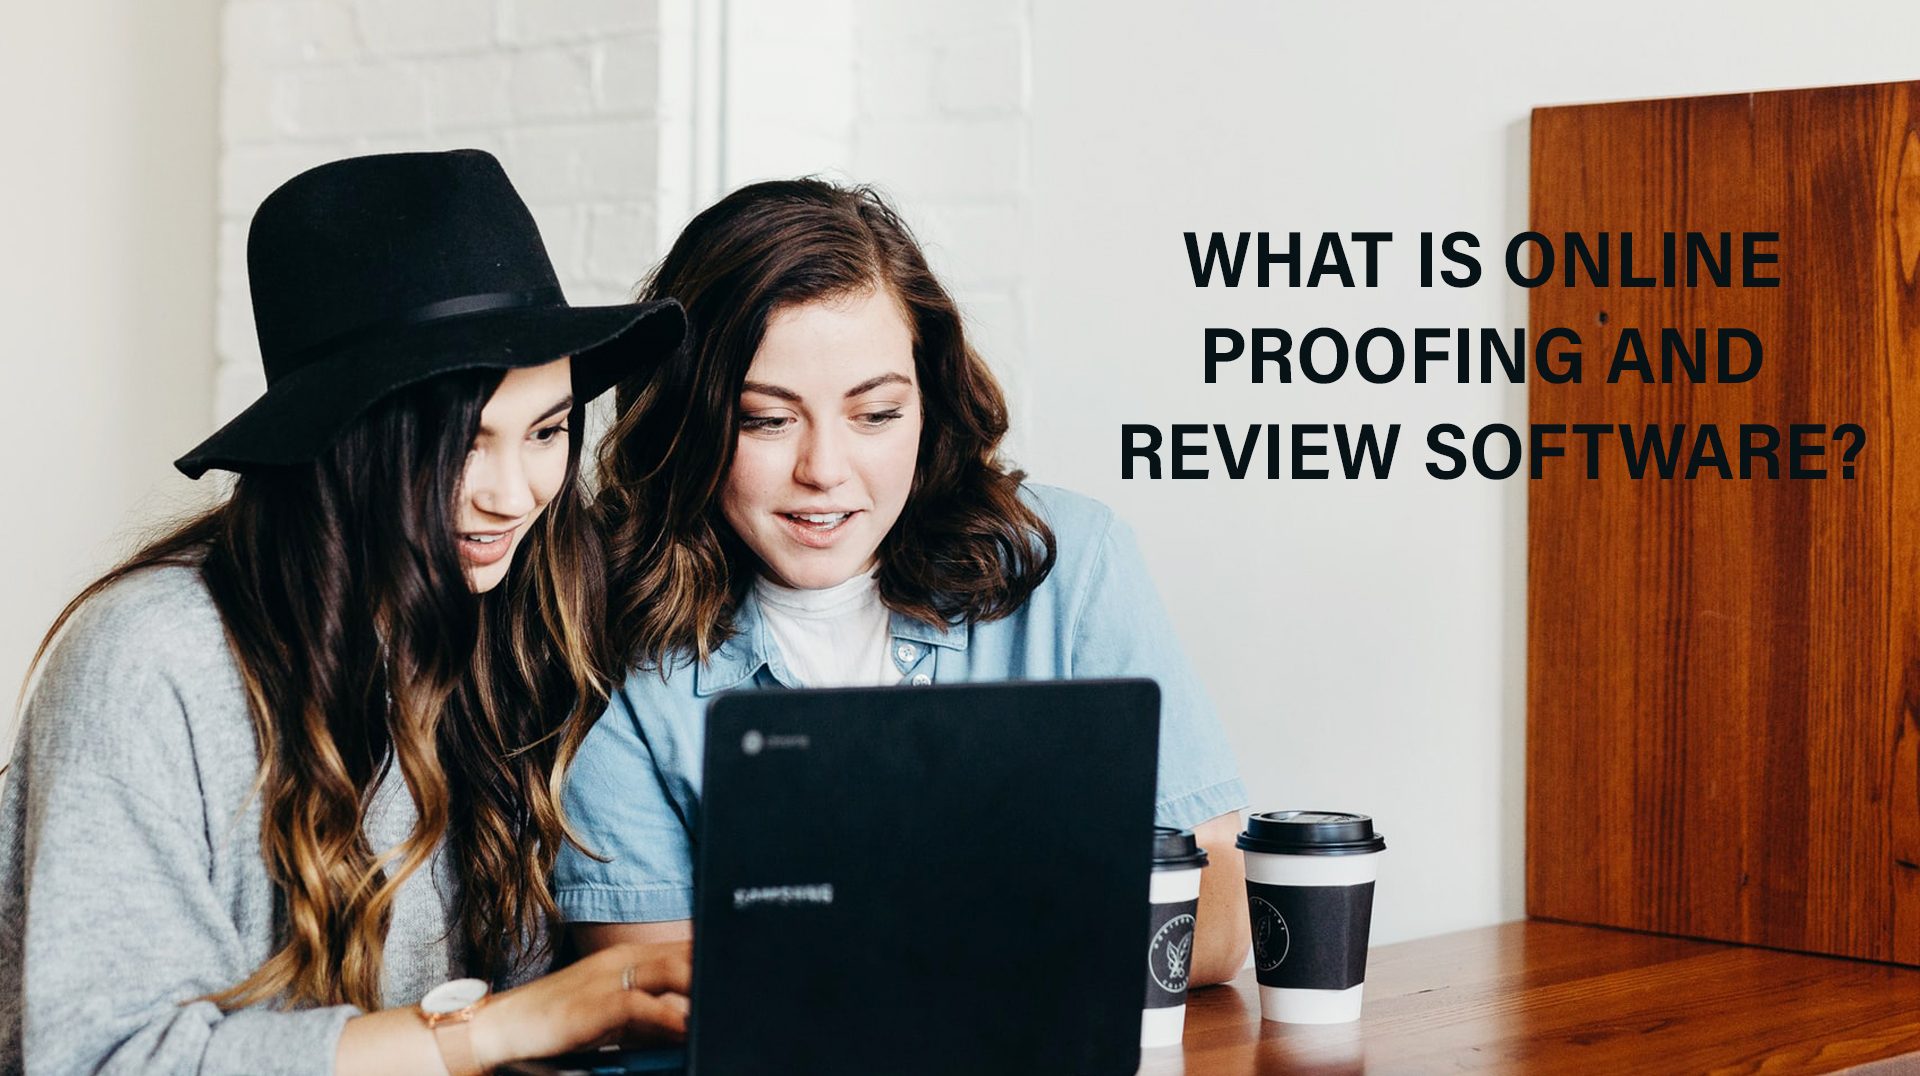 What-is-online-proofing-and-review-software-1